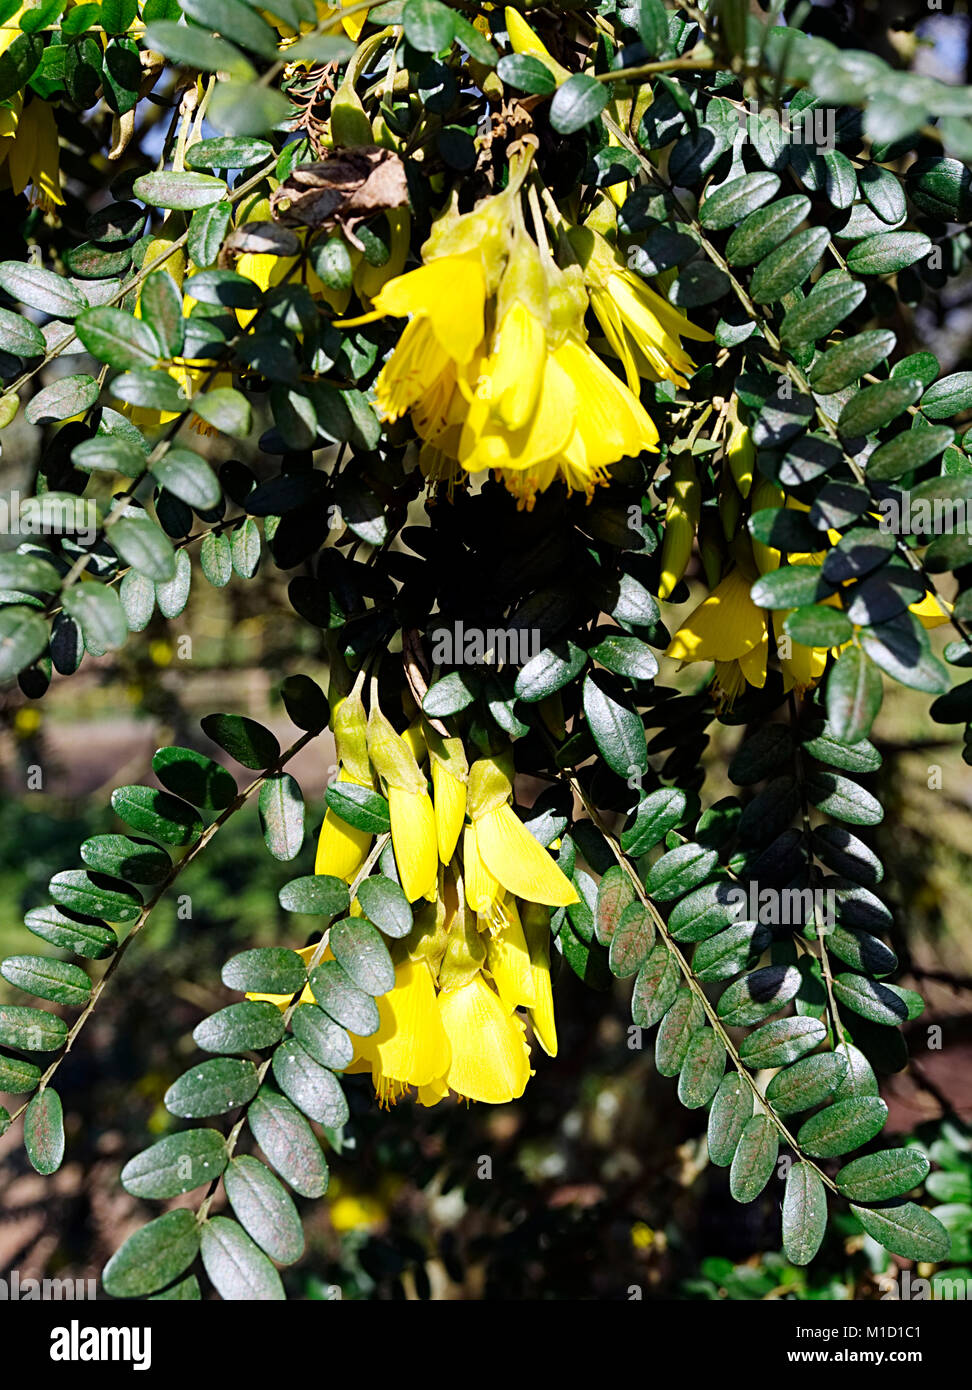 The evergreen shrub Sophora Microphylla 'Sun King' a, showing flowers and leaves. Stock Photo